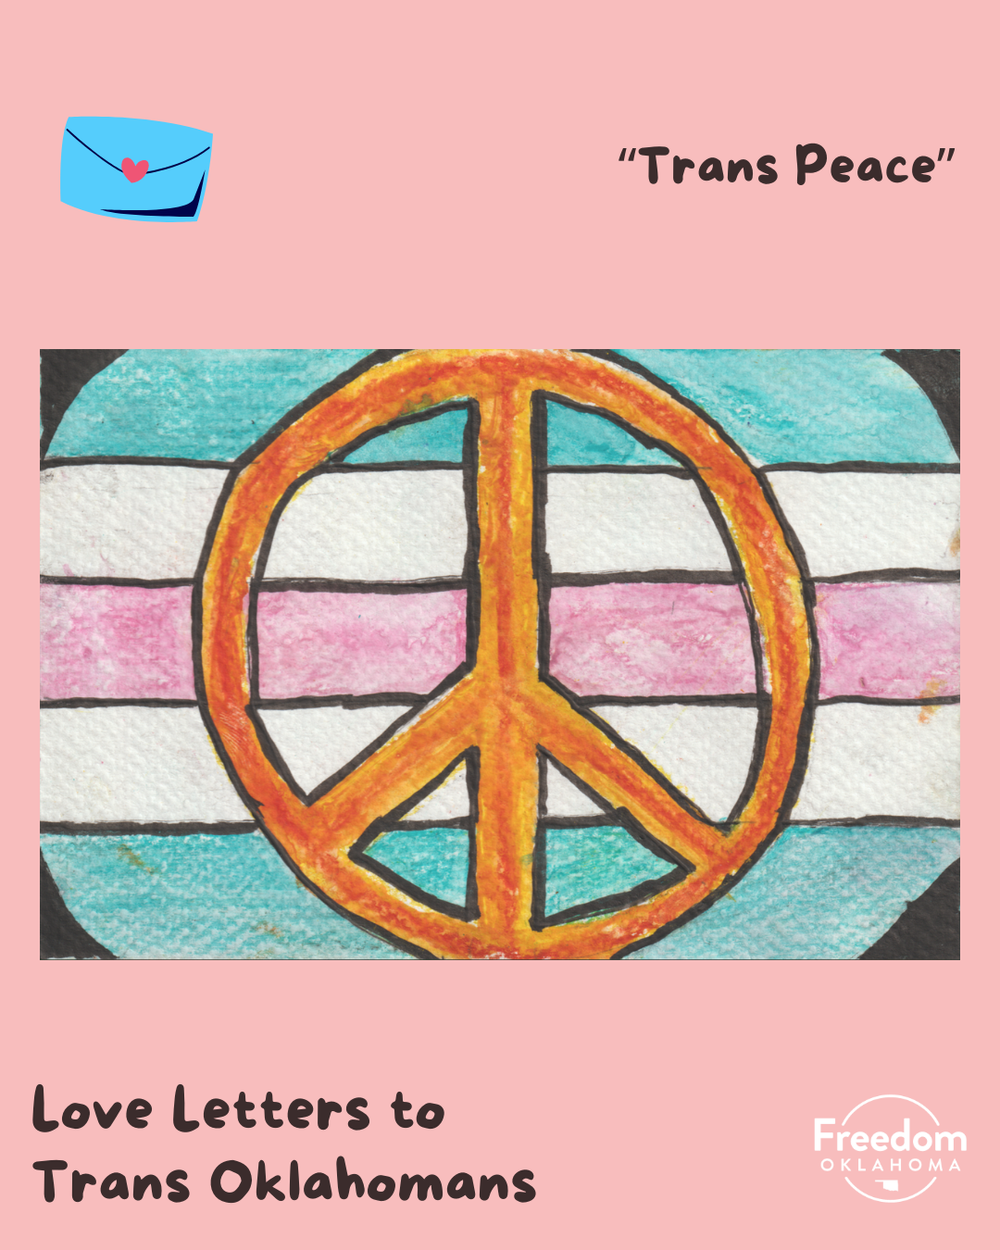  Similar pink graphic with artwork in the center: Painting of the Trans Pride flag colors with a yellow/orange peace sign in the center outlined with black marker. 